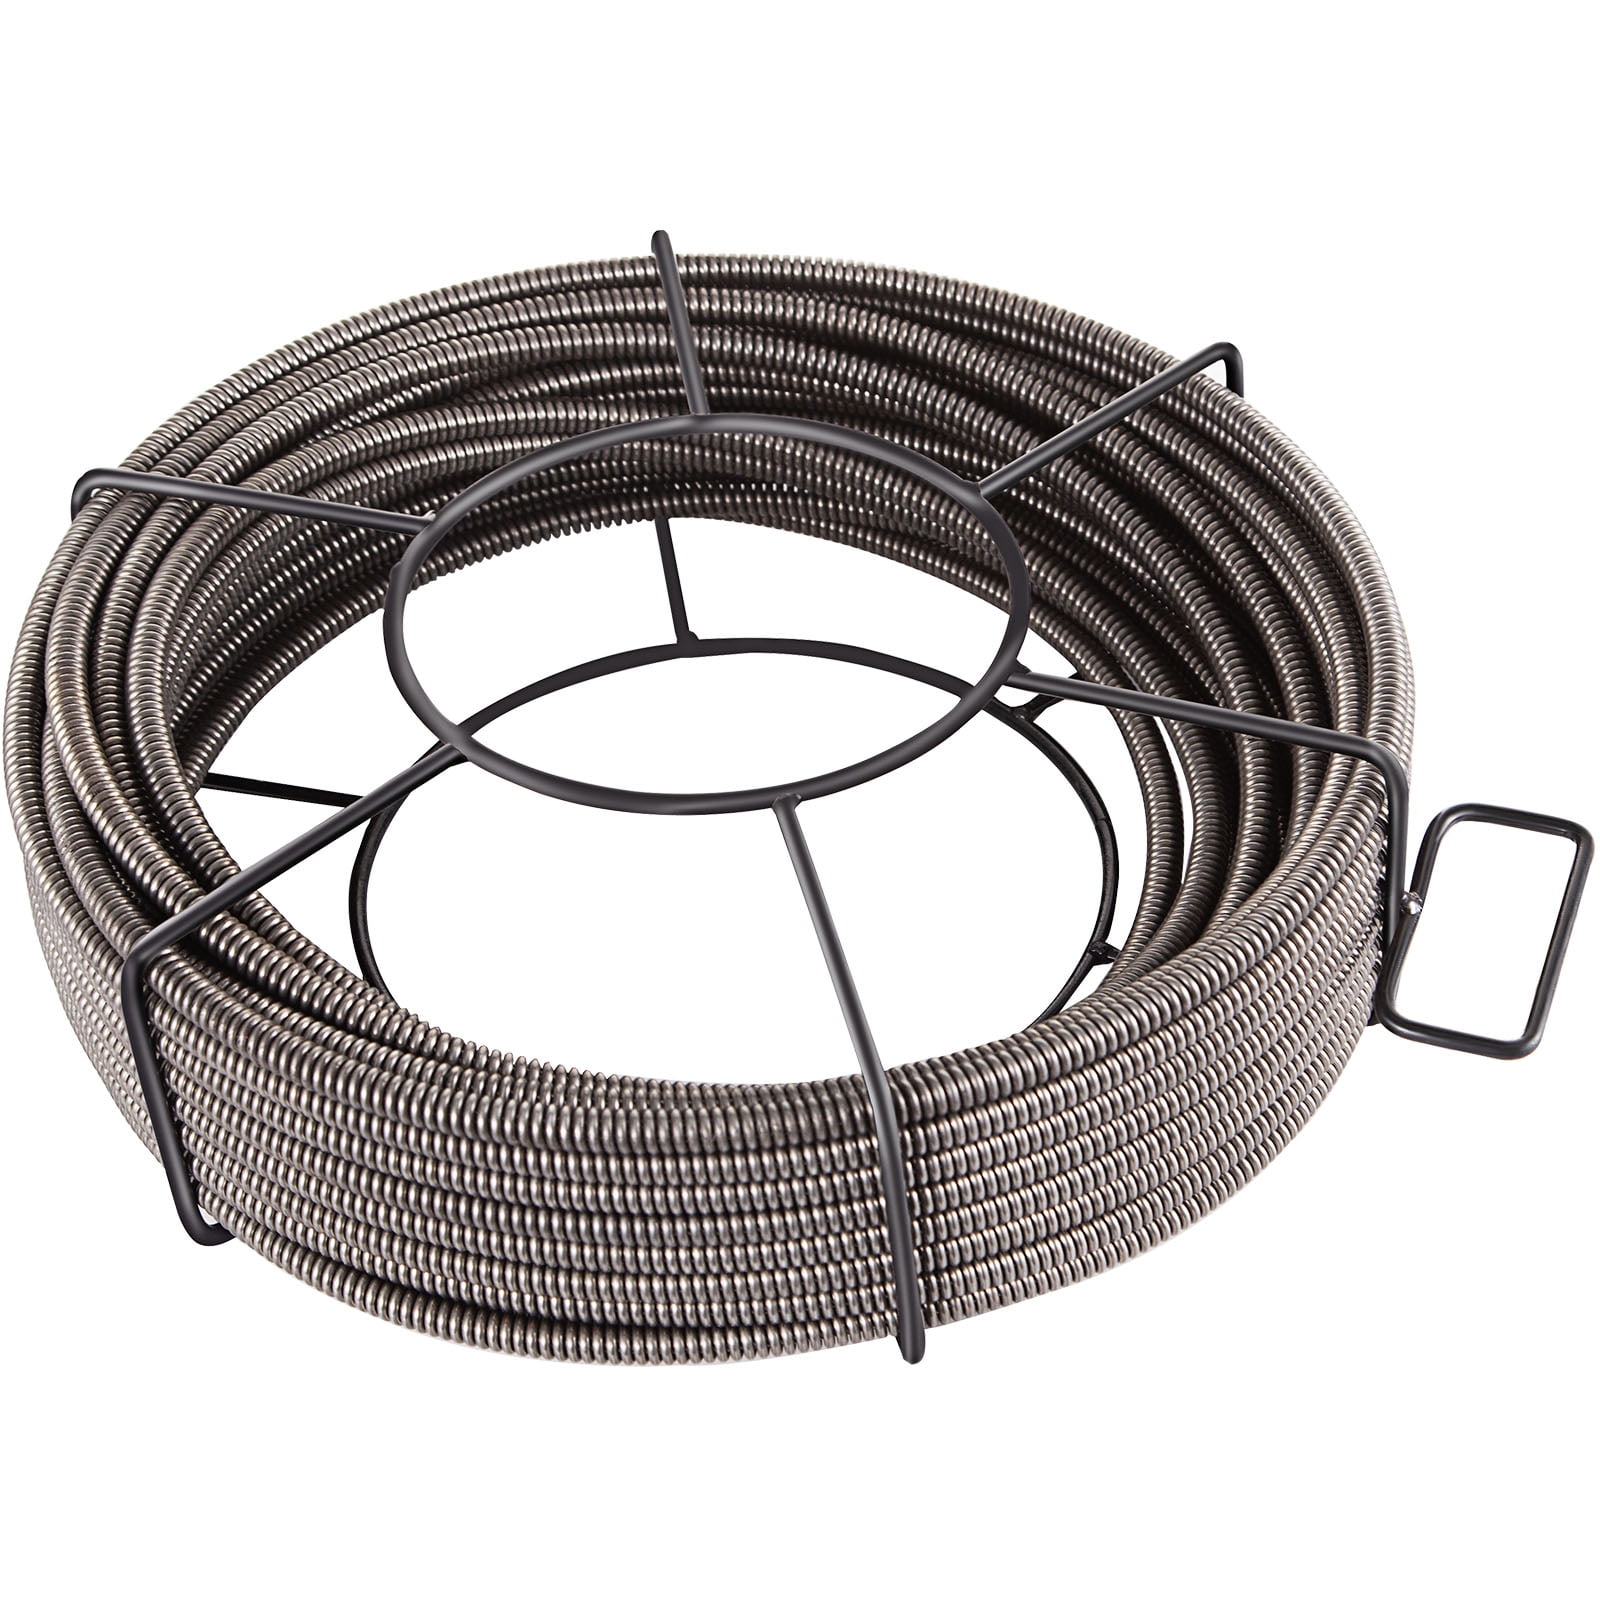 Handy Drain Cleaning Cable25 Feet x 3/8 inch Cable Sewer Cable Drain Auger